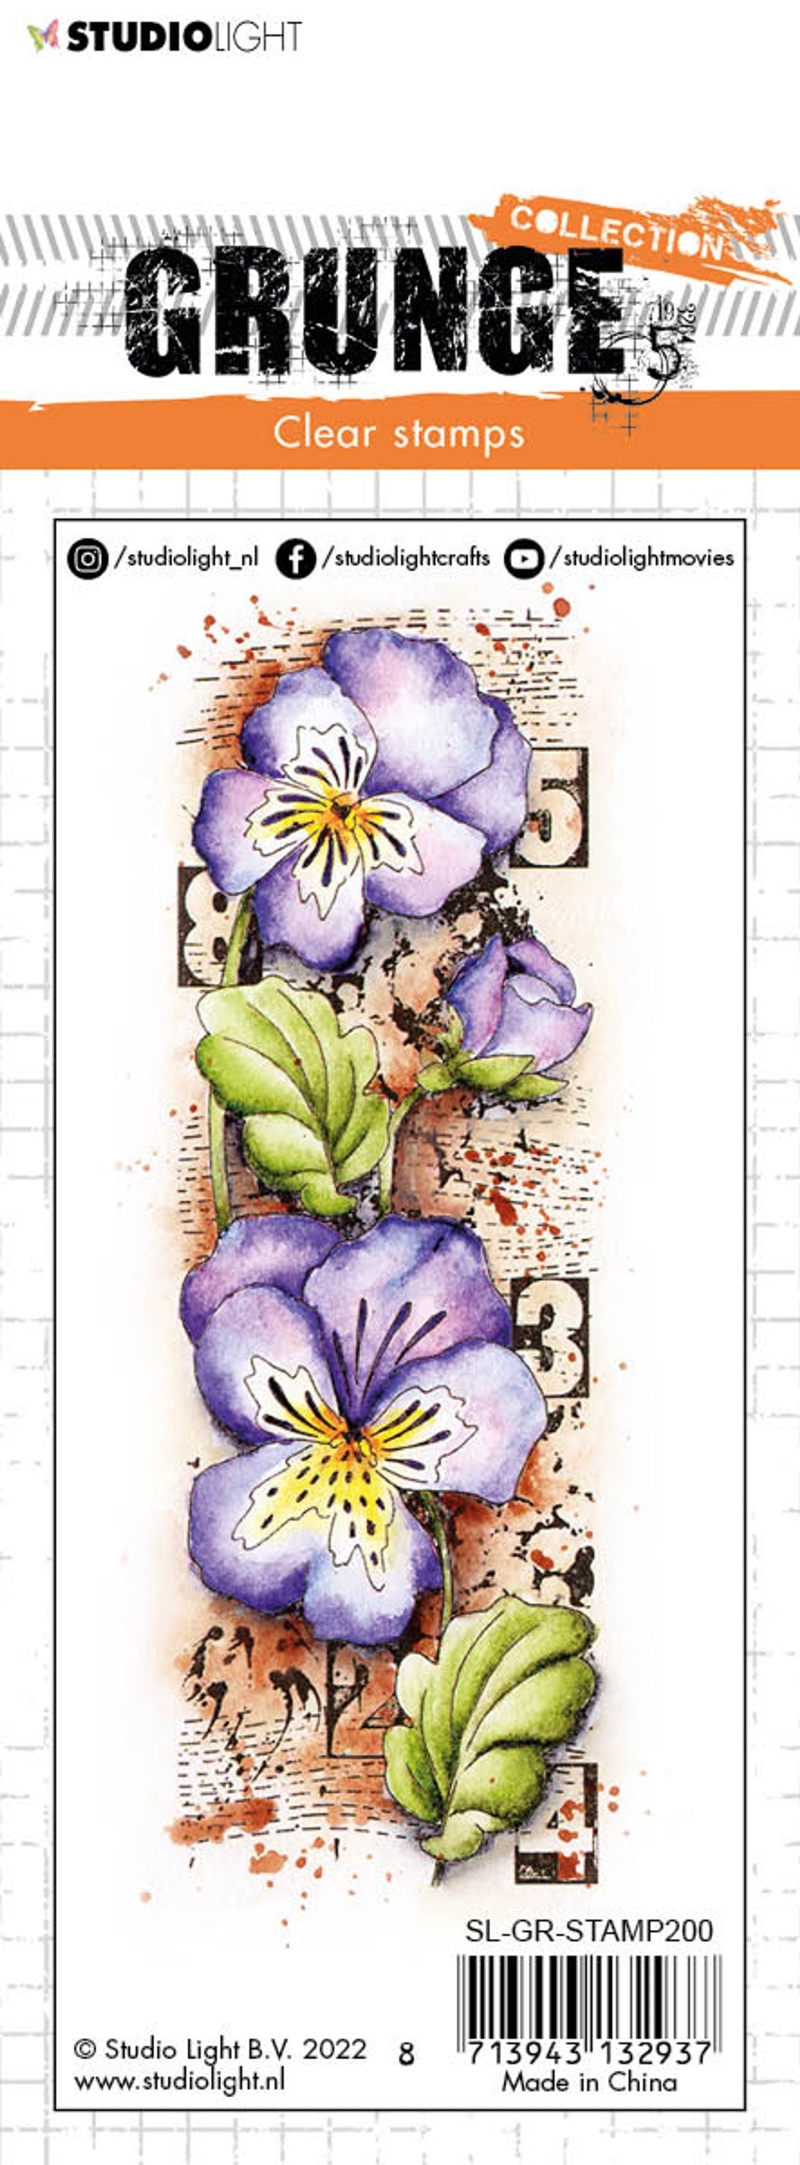 Sl Clear Stamp Violets Grunge Collection 148X52,2X3mm 1 Pc Nr.200